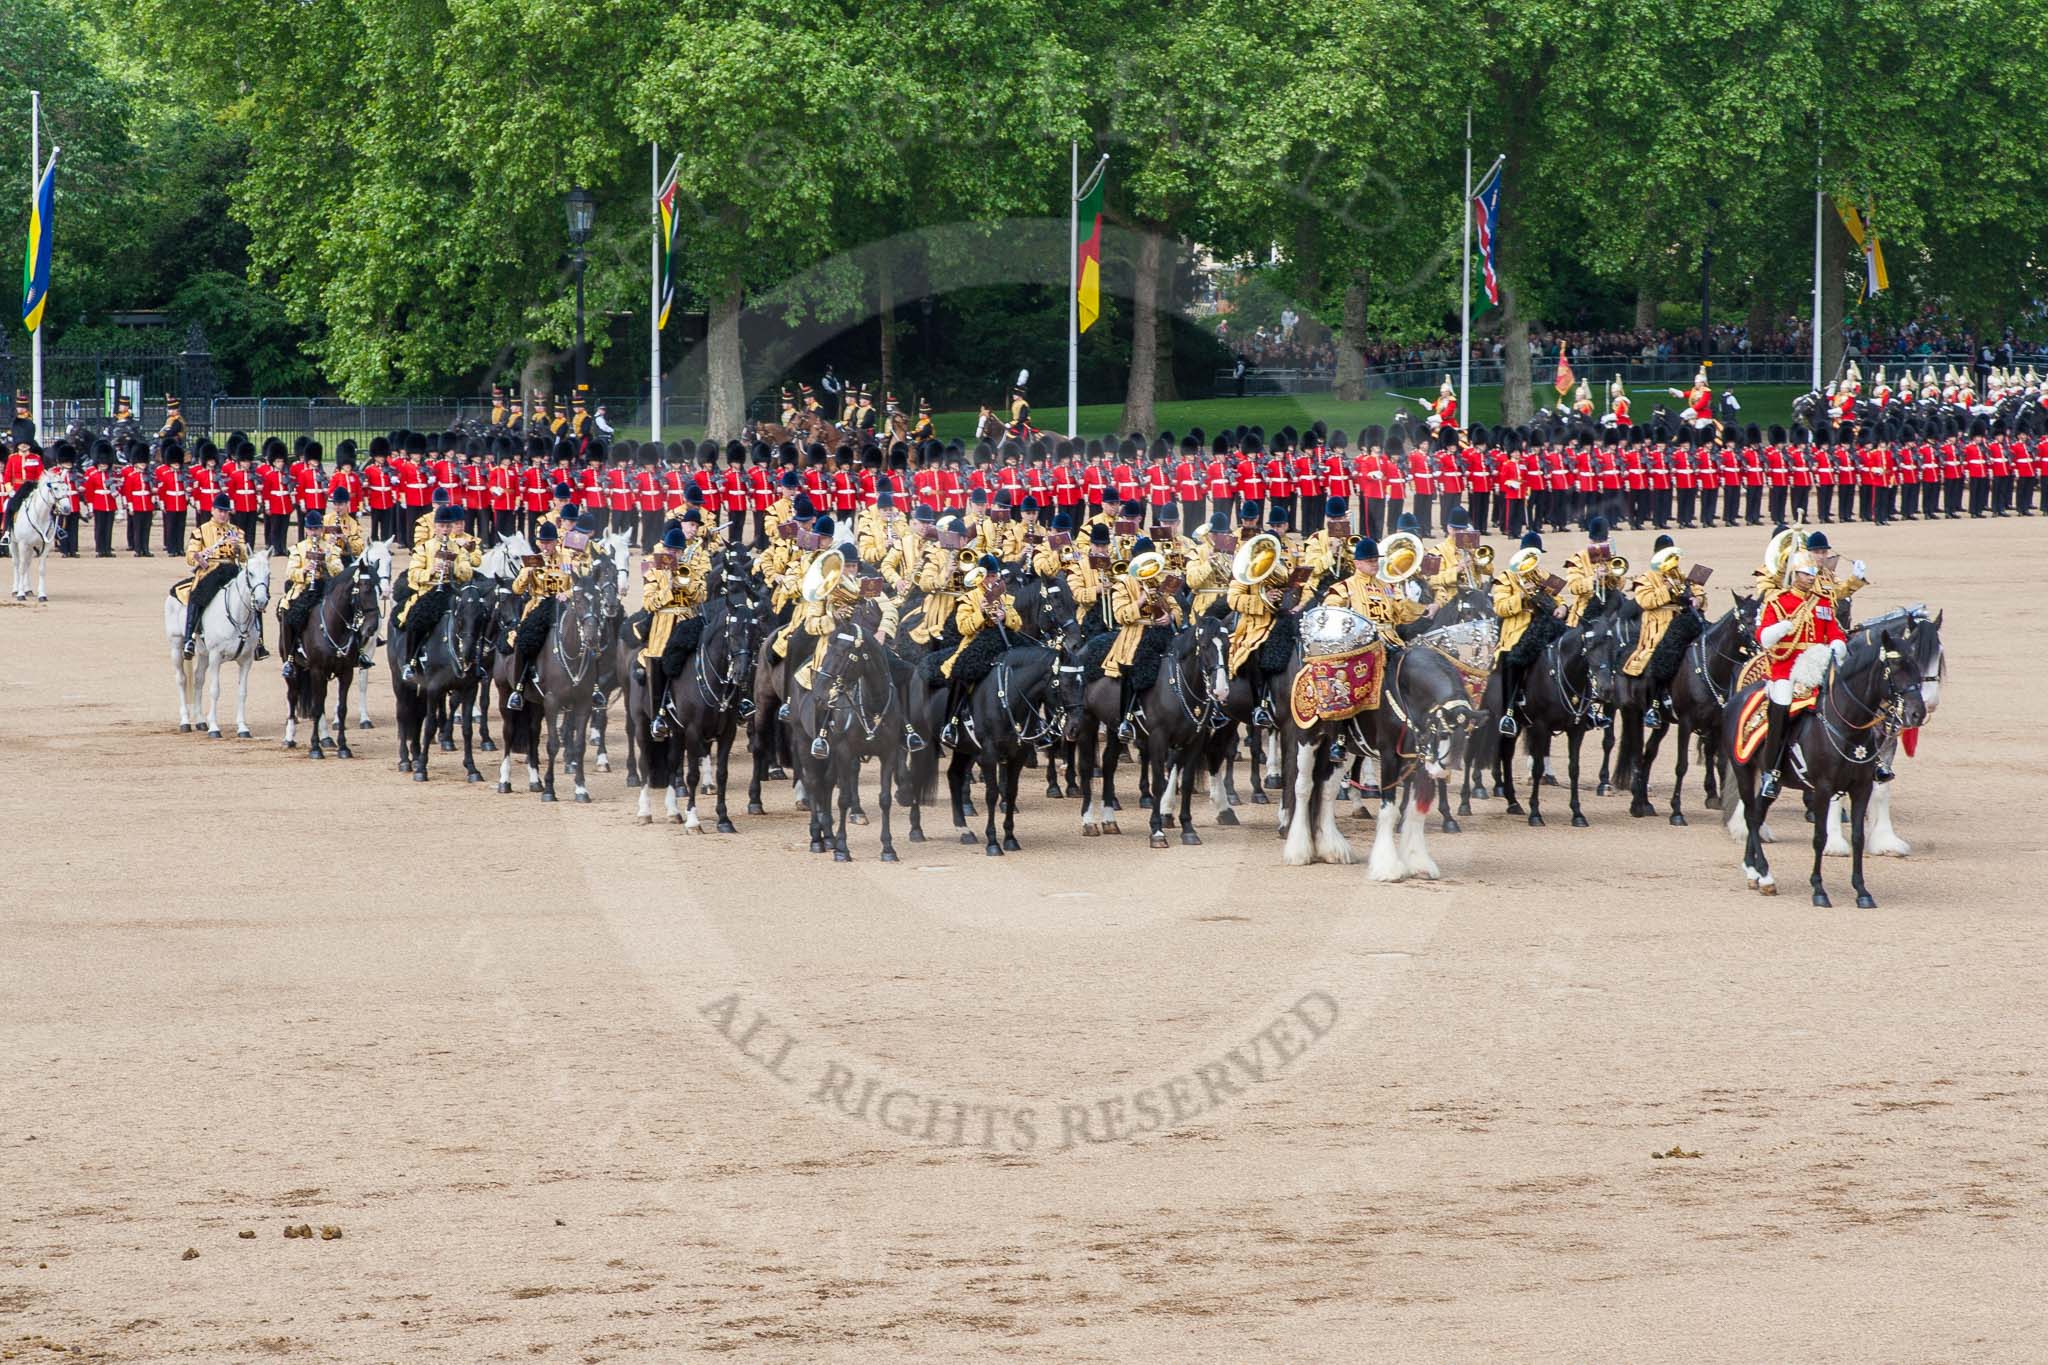 The Colonel's Review 2013: The Mounted Bands of the Household Cavalry during the Ride Past. The Director of Music of the Household Cavalry, Major Paul Wilman, The Life Guards..
Horse Guards Parade, Westminster,
London SW1,

United Kingdom,
on 08 June 2013 at 11:55, image #758